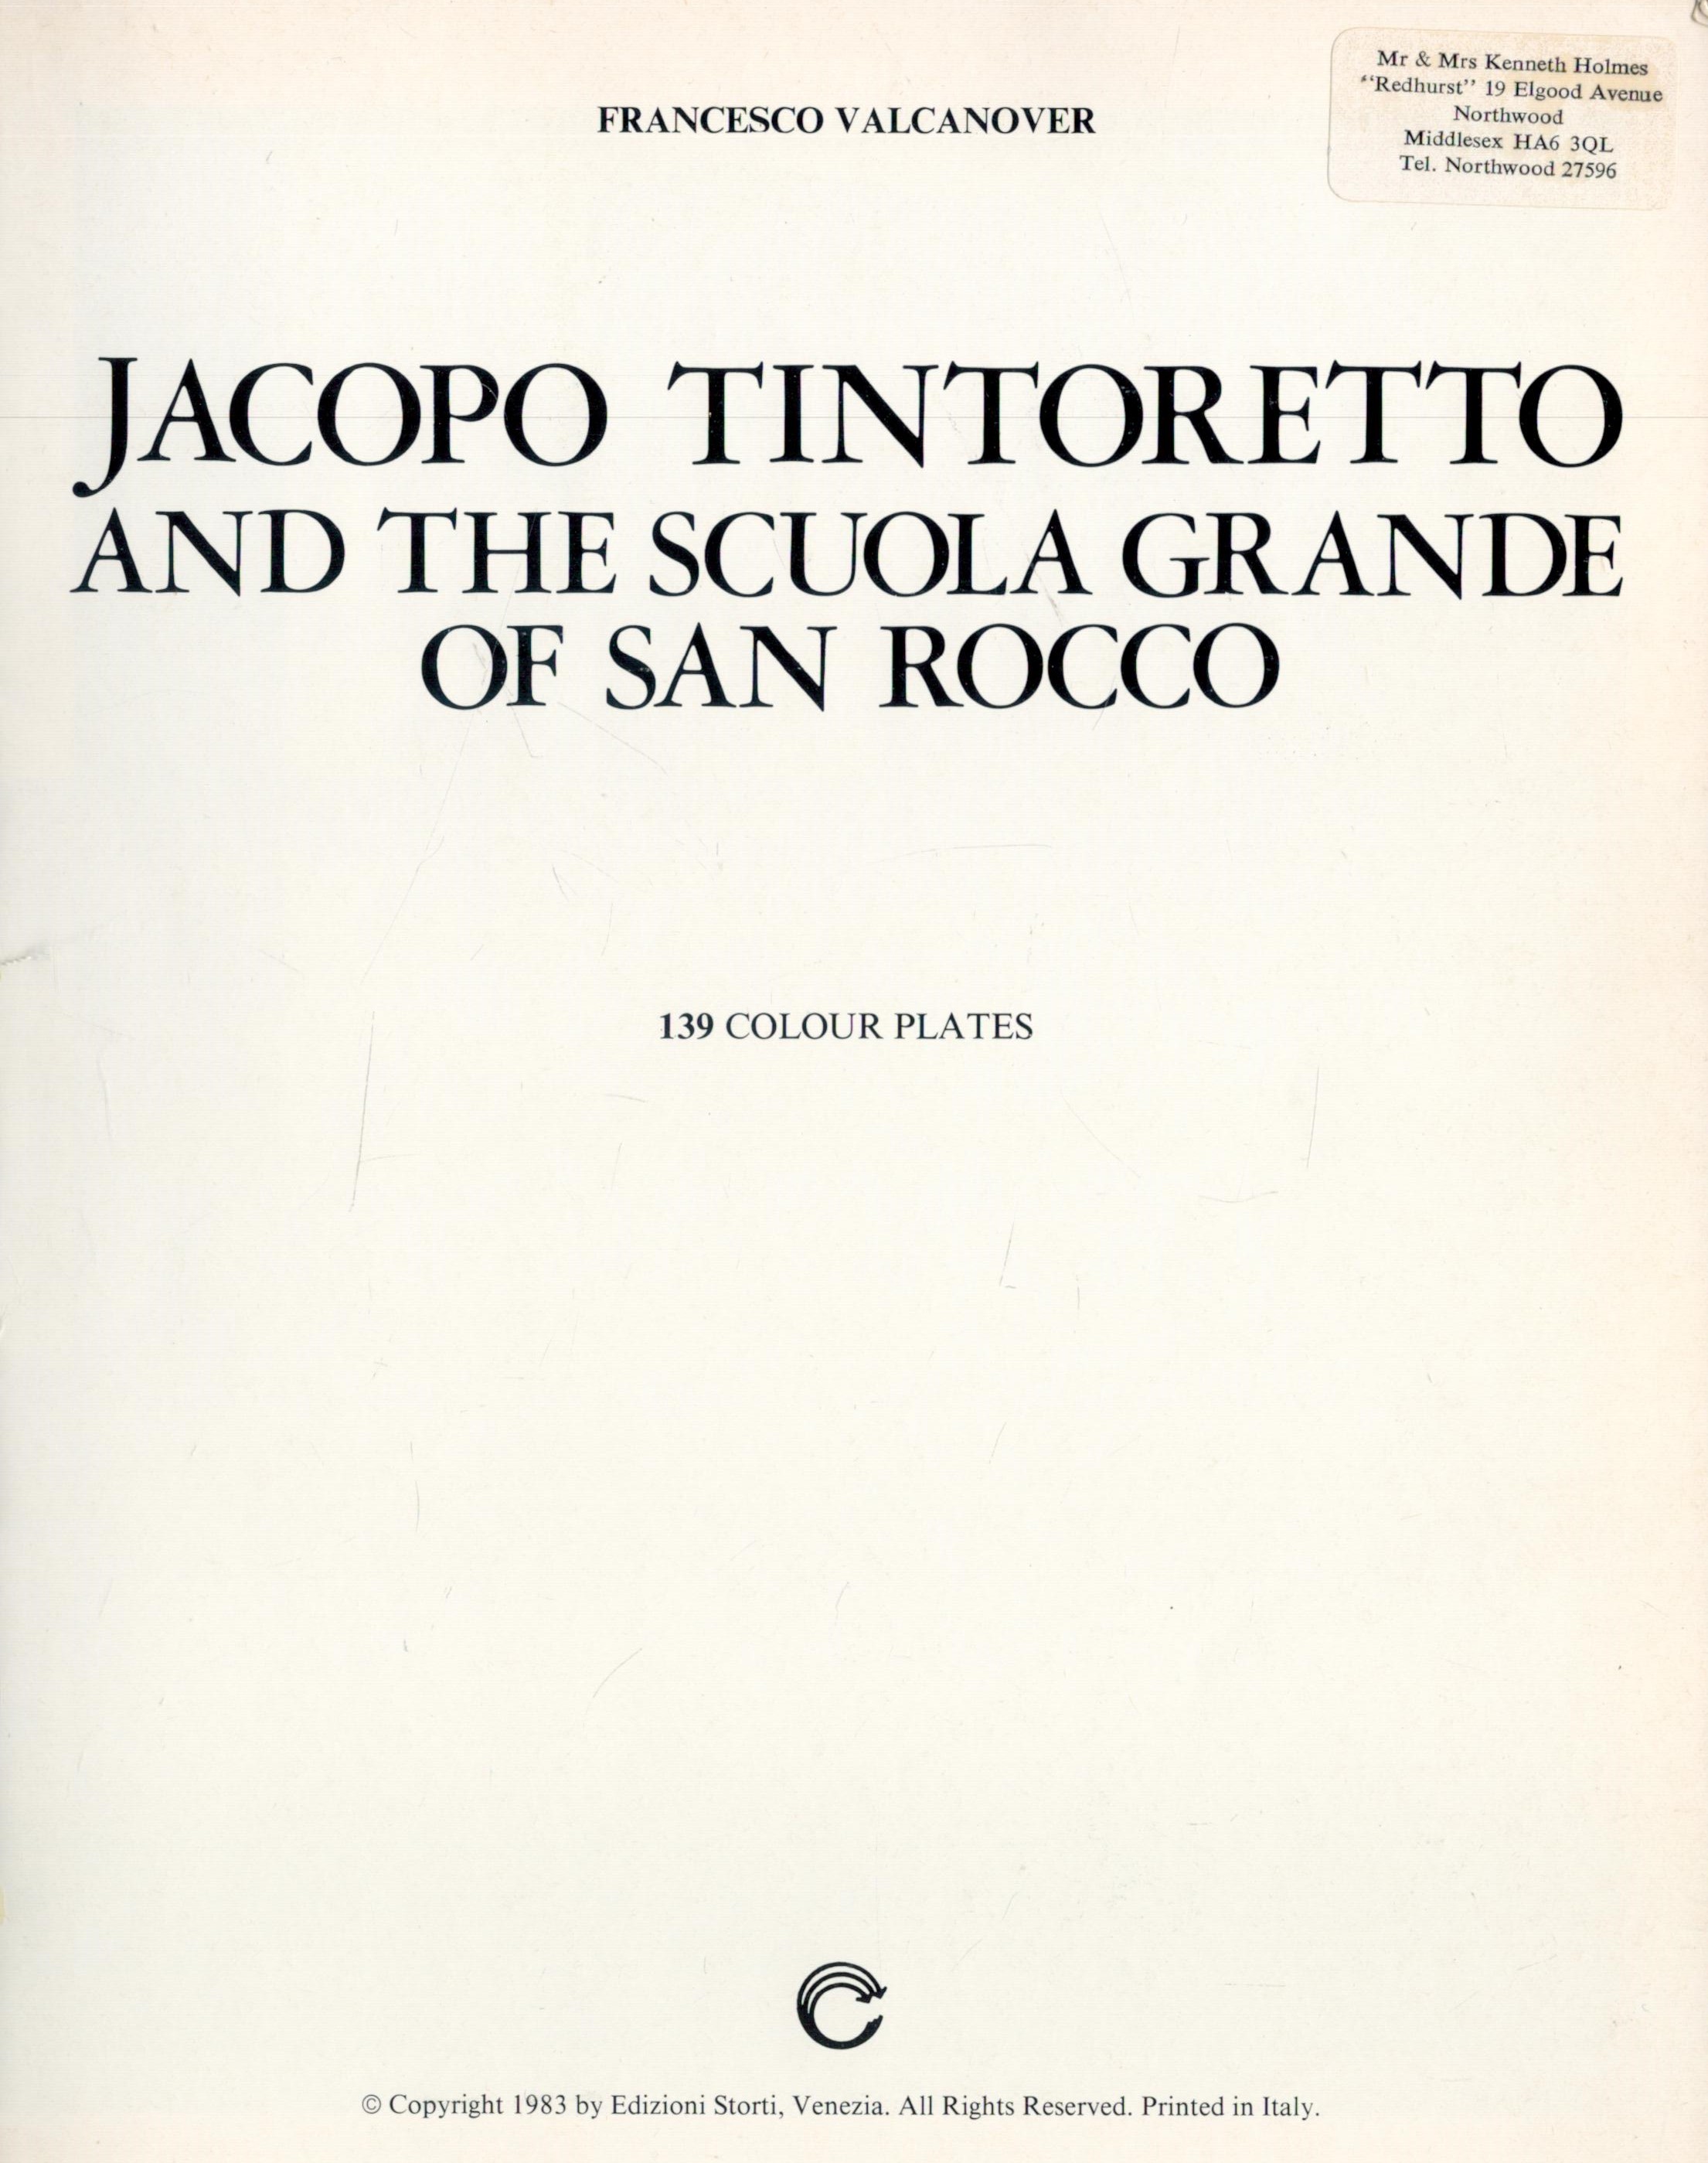 Jacopo Tintoretto and the Scuola Grande of San Rocco by Francesco Valcanover 1983 First Edition - Image 2 of 3